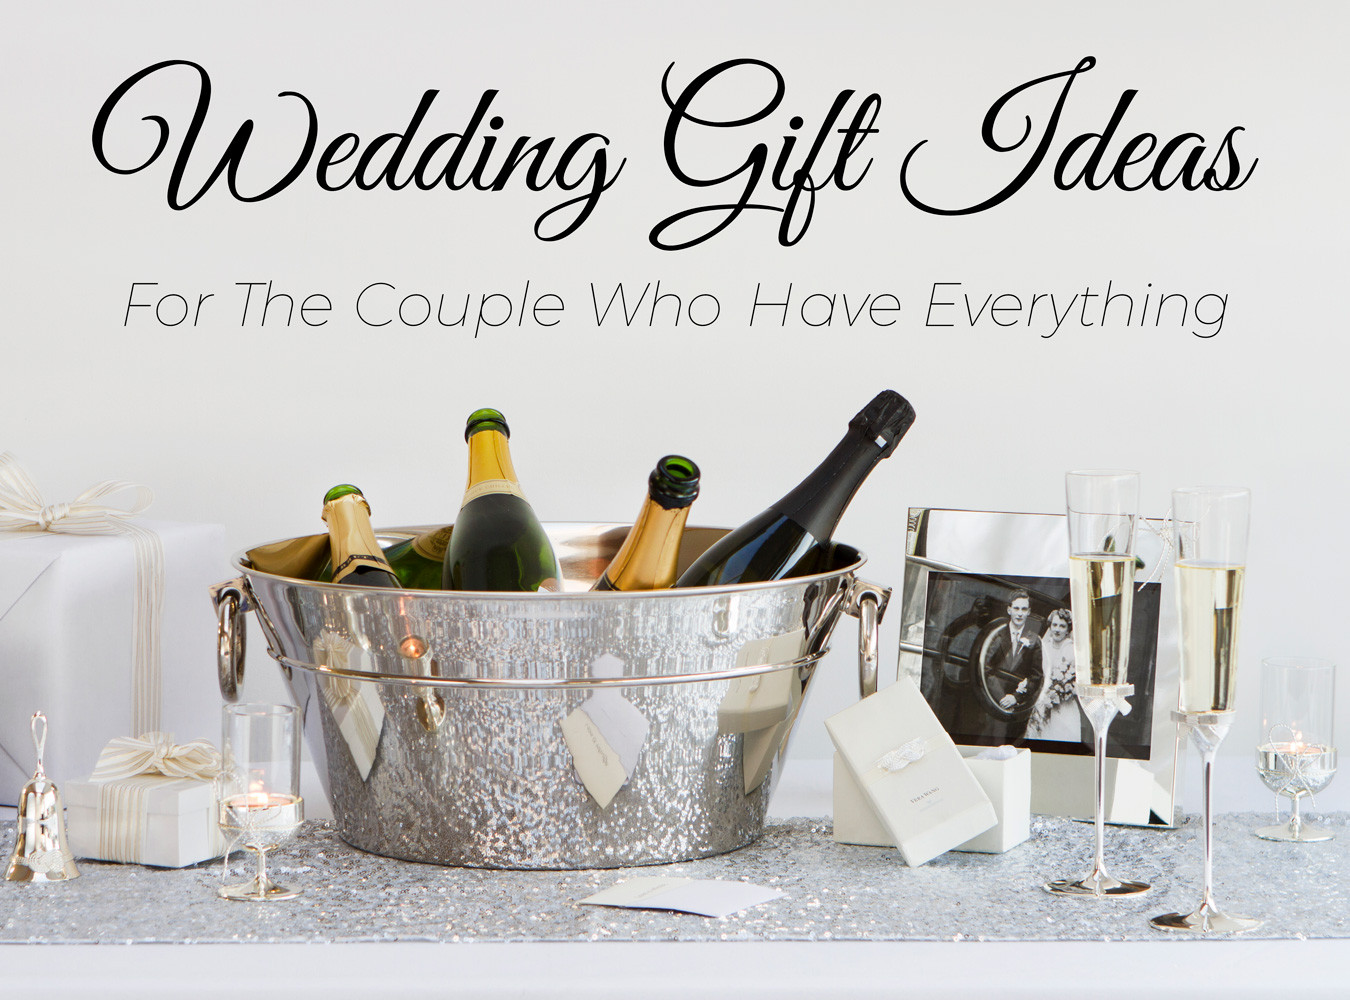 Housewarming Gift Ideas For Couples Who Have Everything
 5 Wedding Gift Ideas for the Couple Who Have Everything